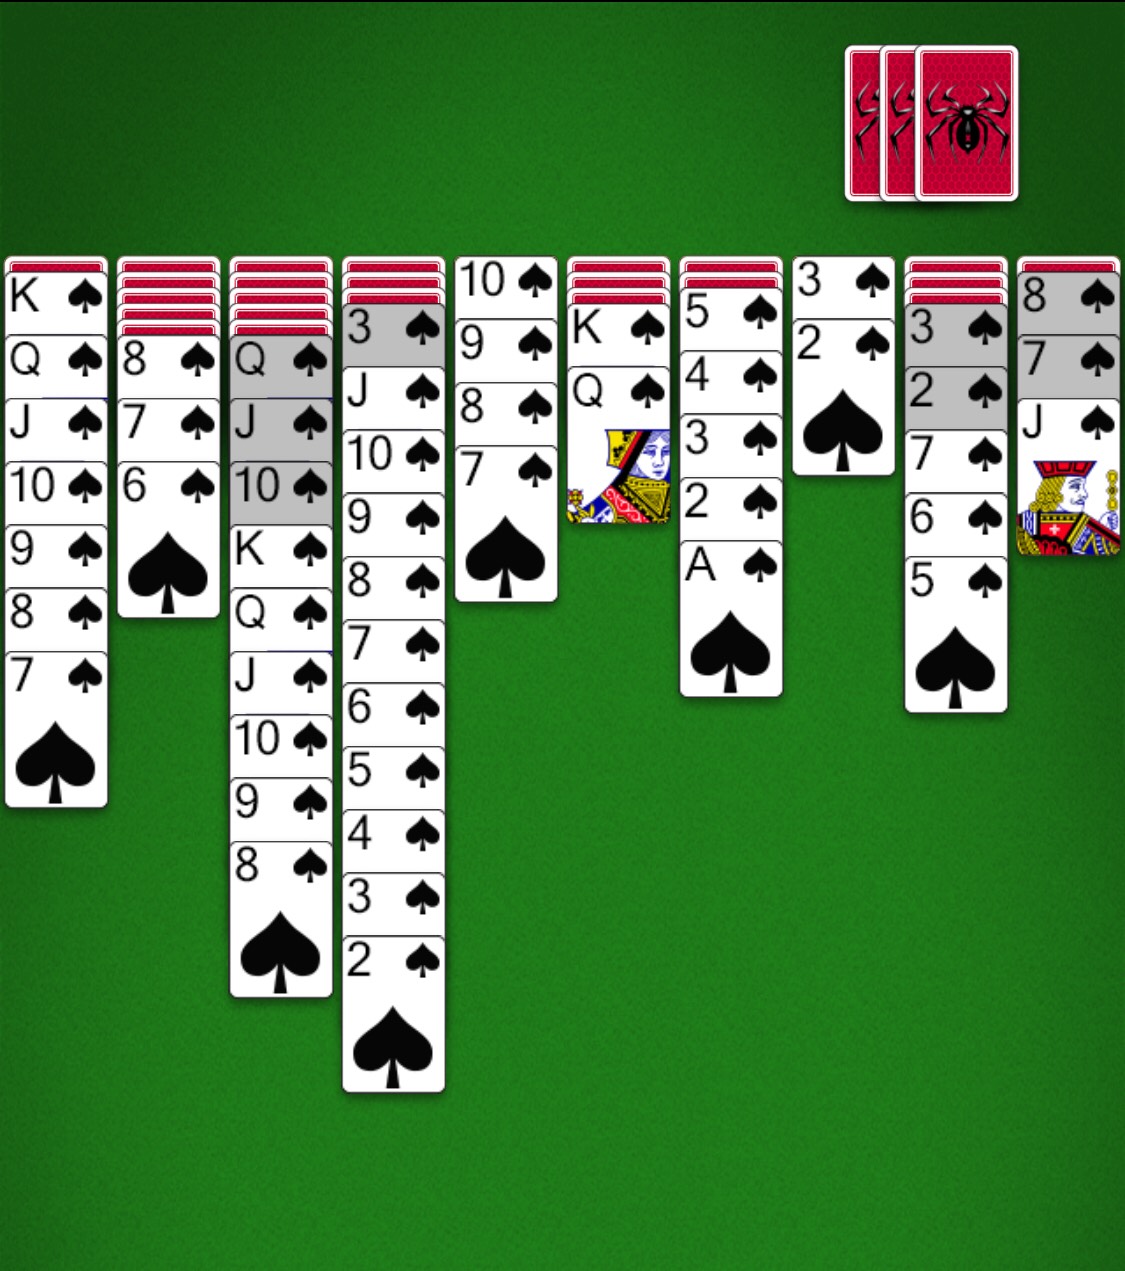 spider solitaire download from mobility ware